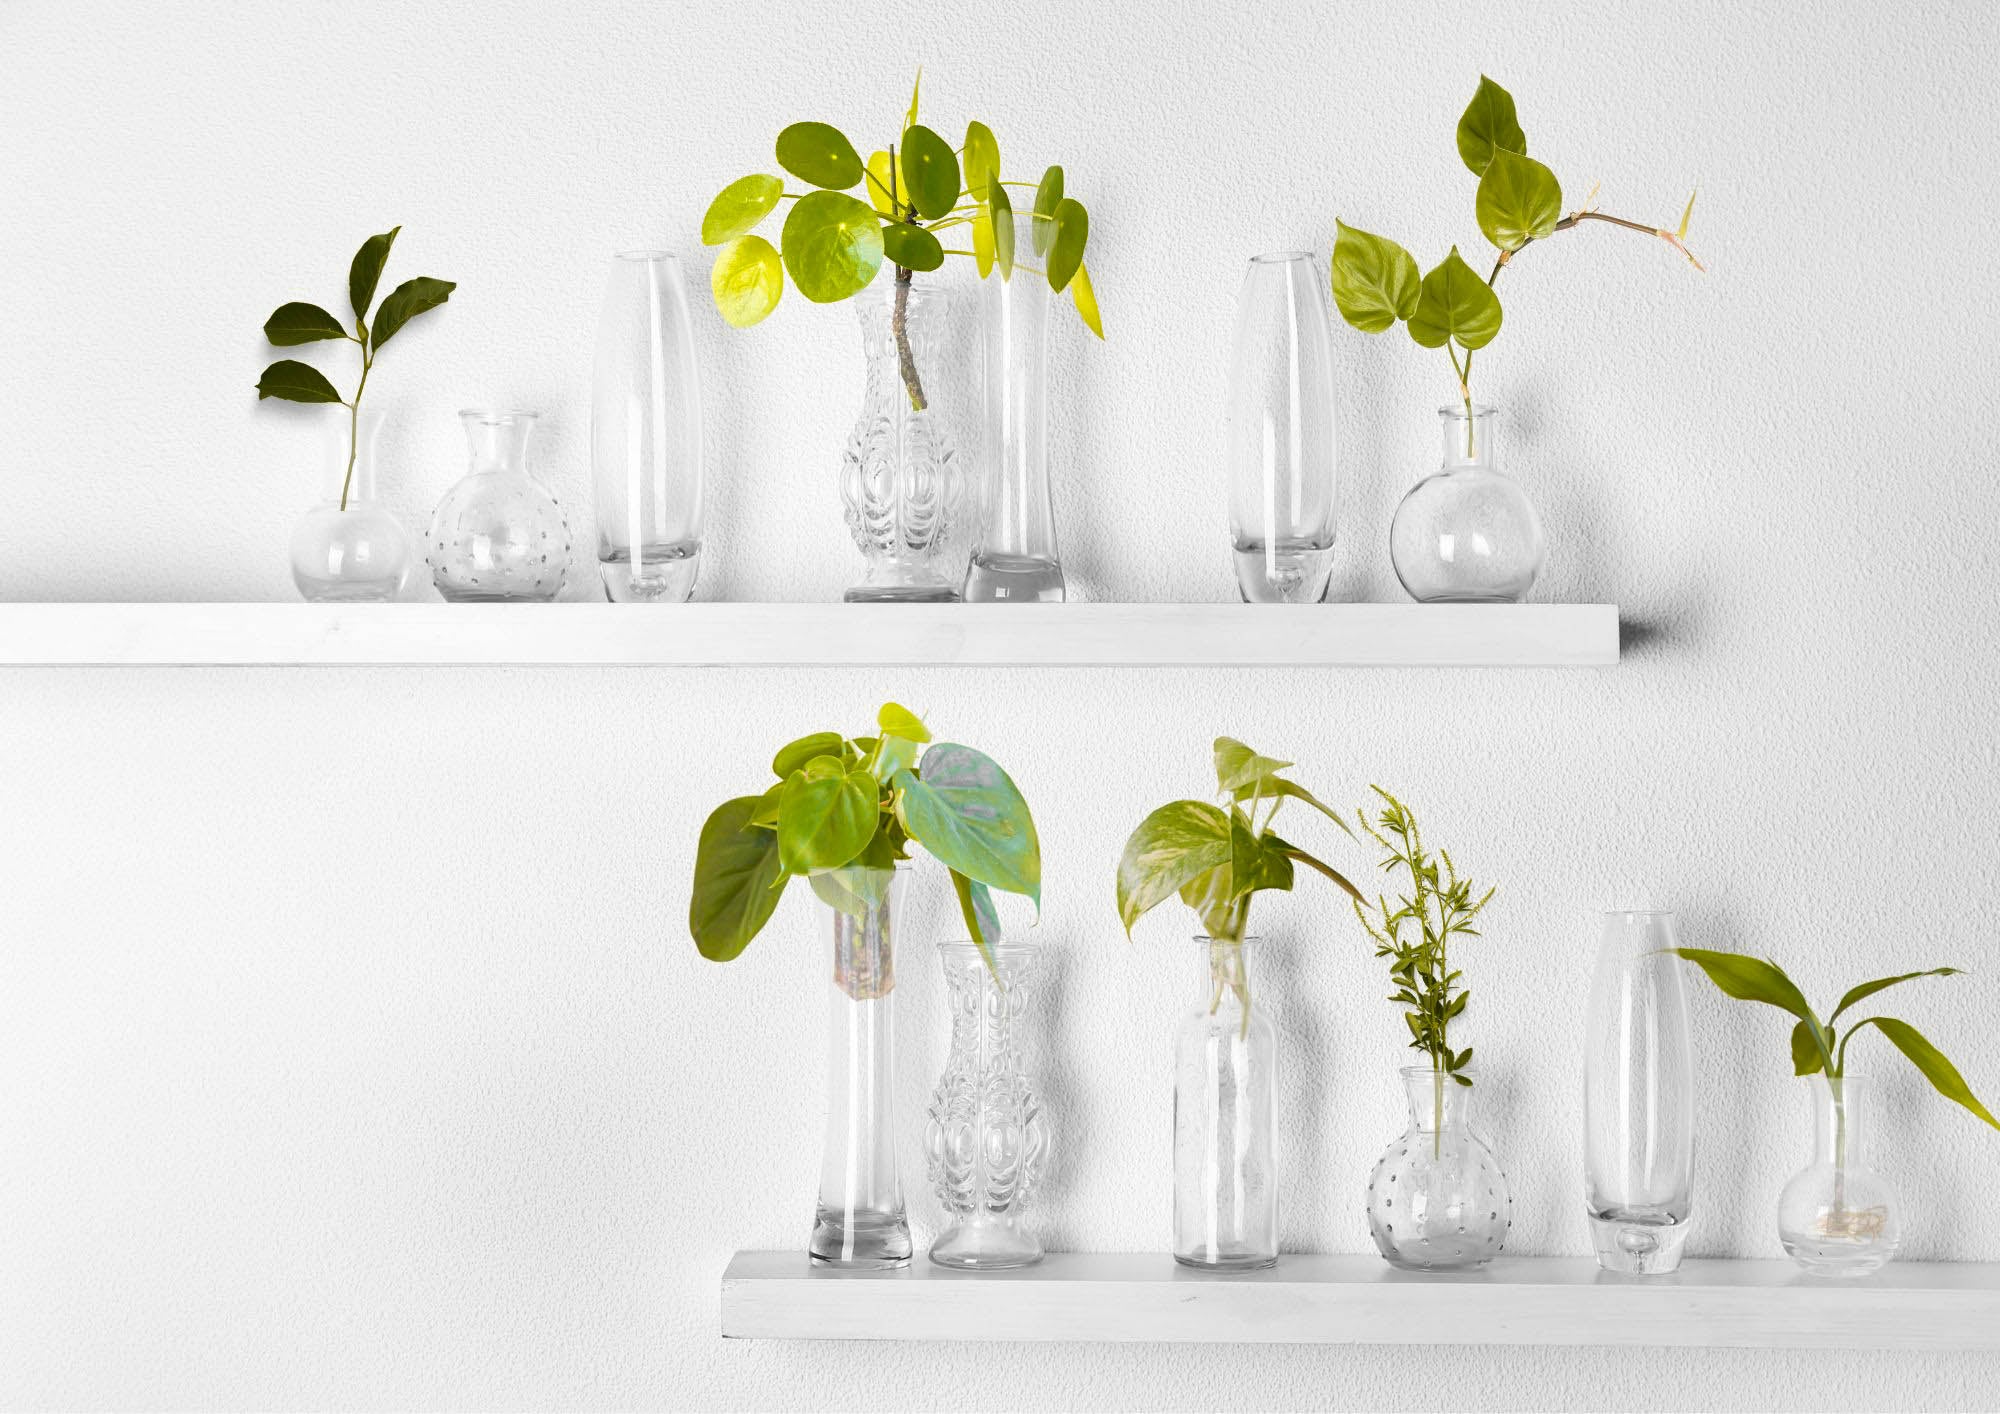 Glass containers with plants